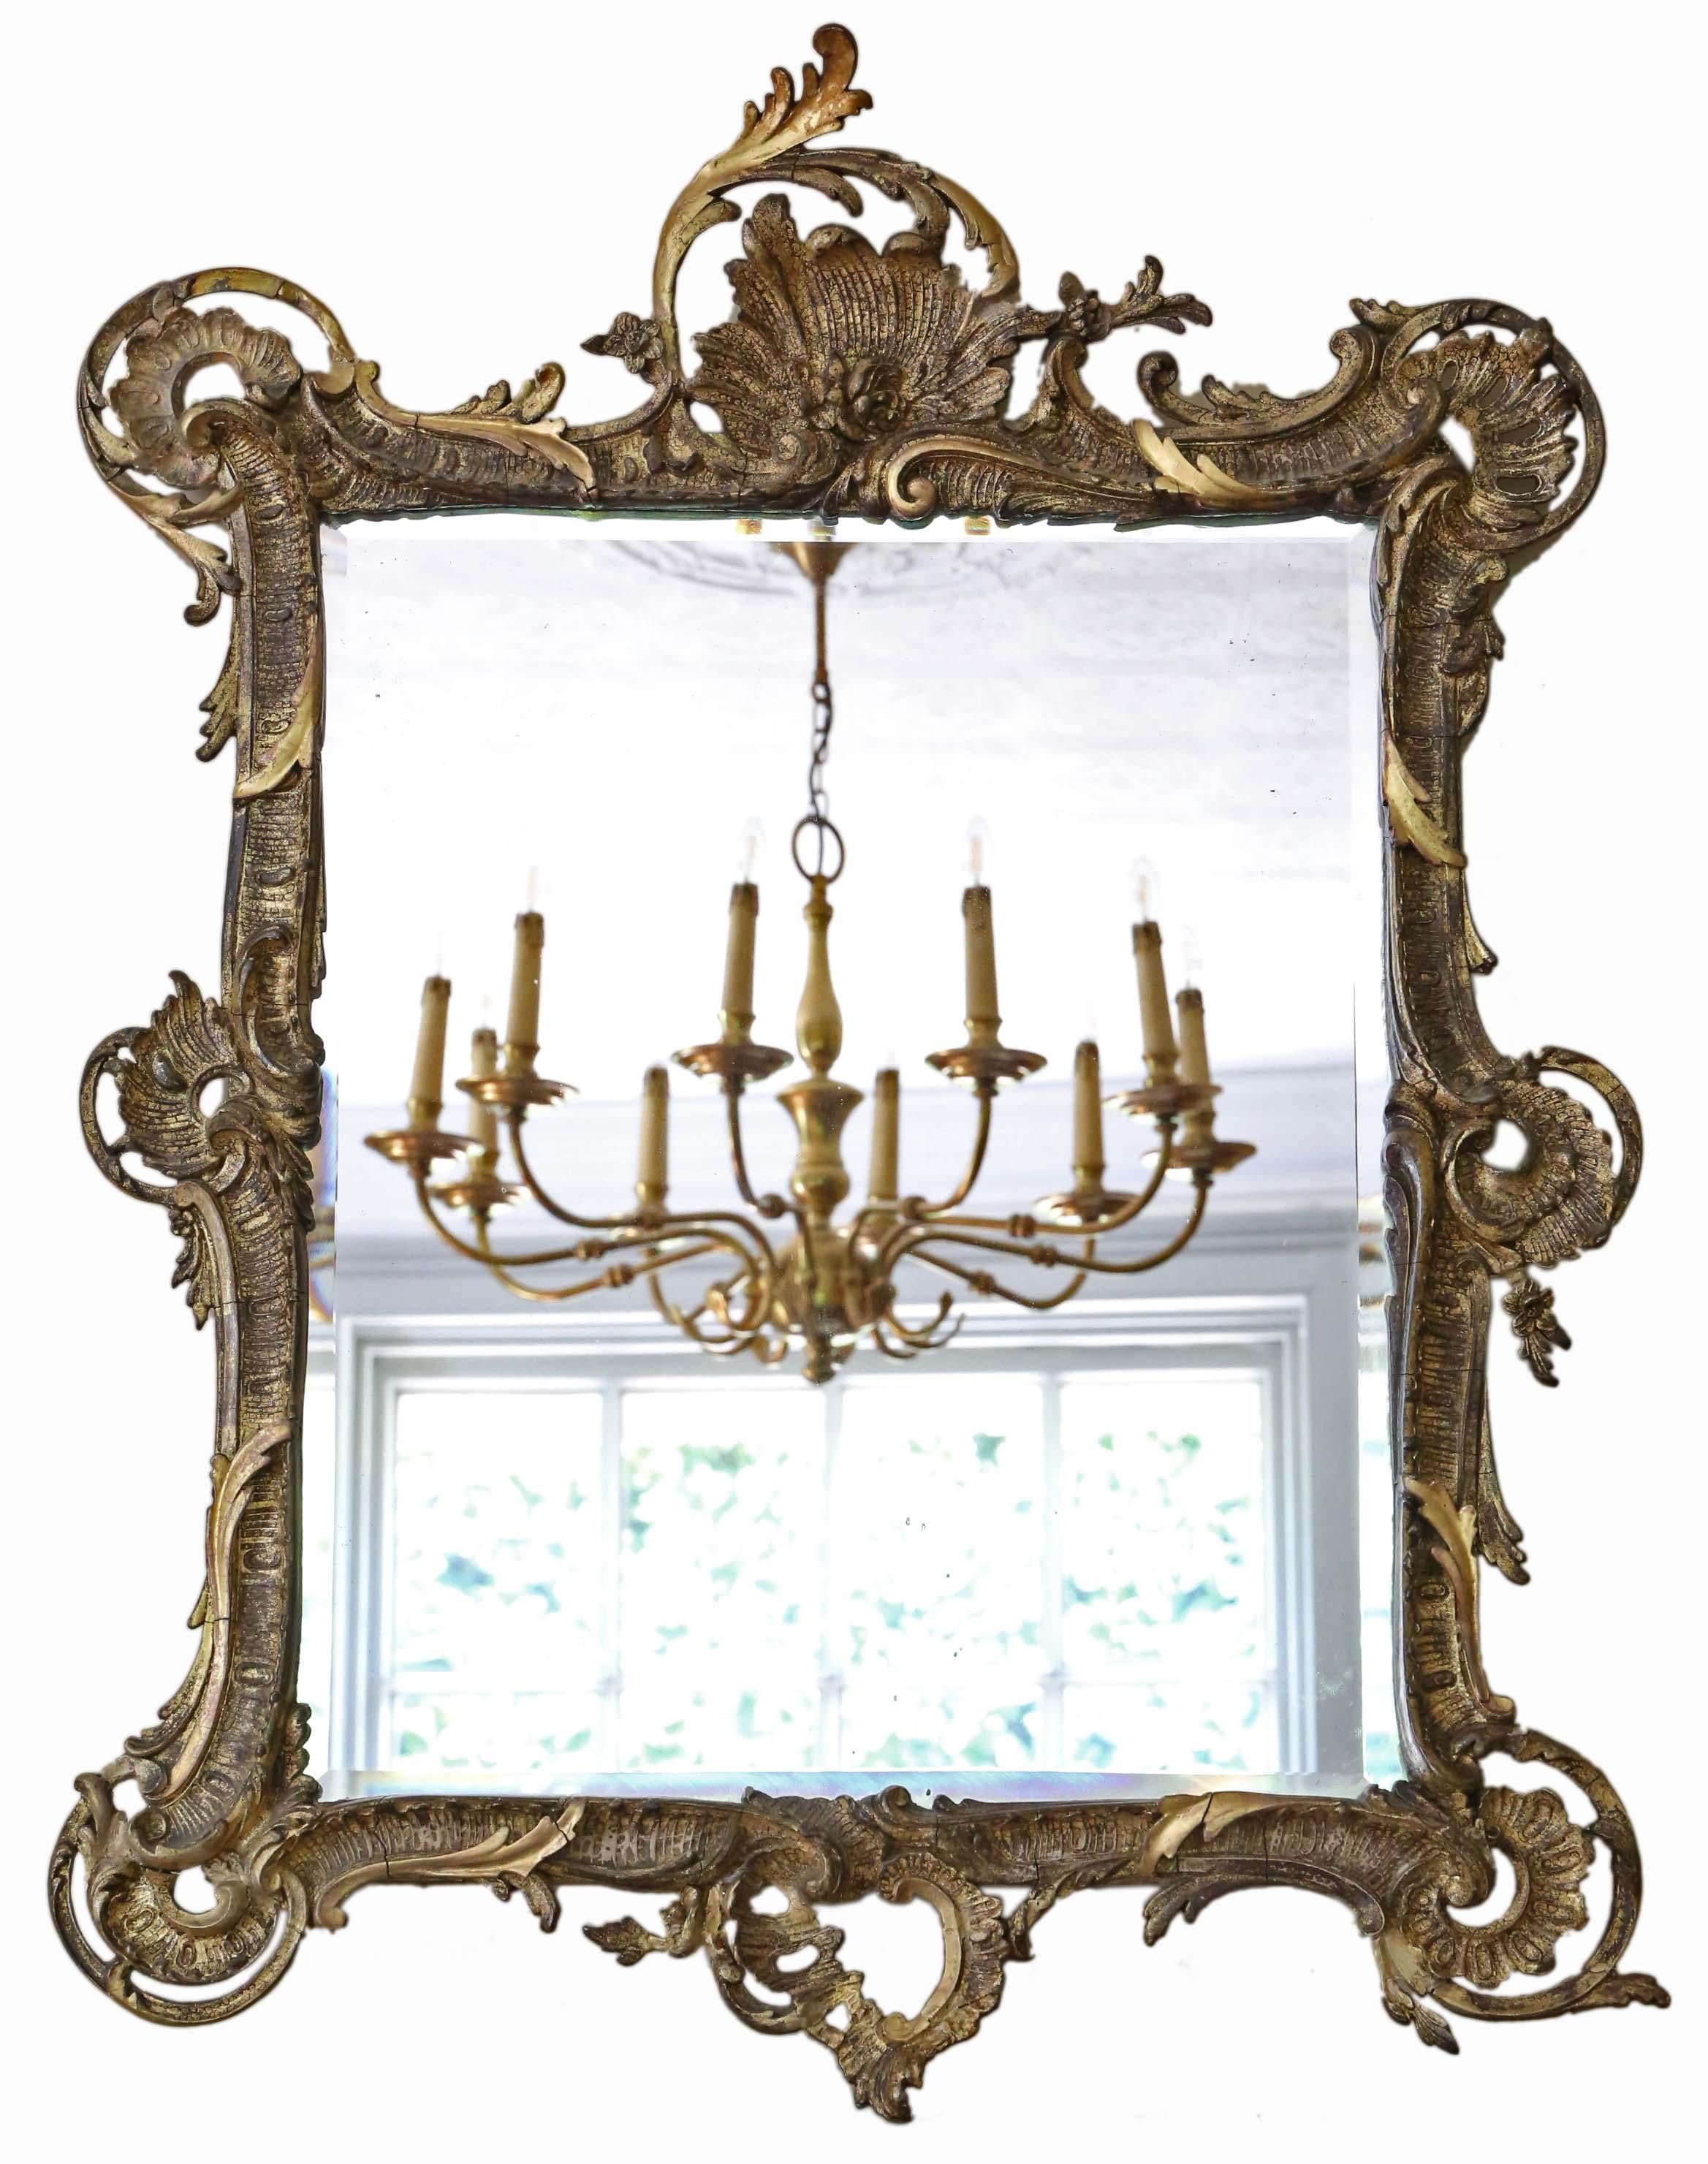 Antique Large Fine Quality Early 19th Century Gilt Overmantel or Wall Mirror For Sale 6